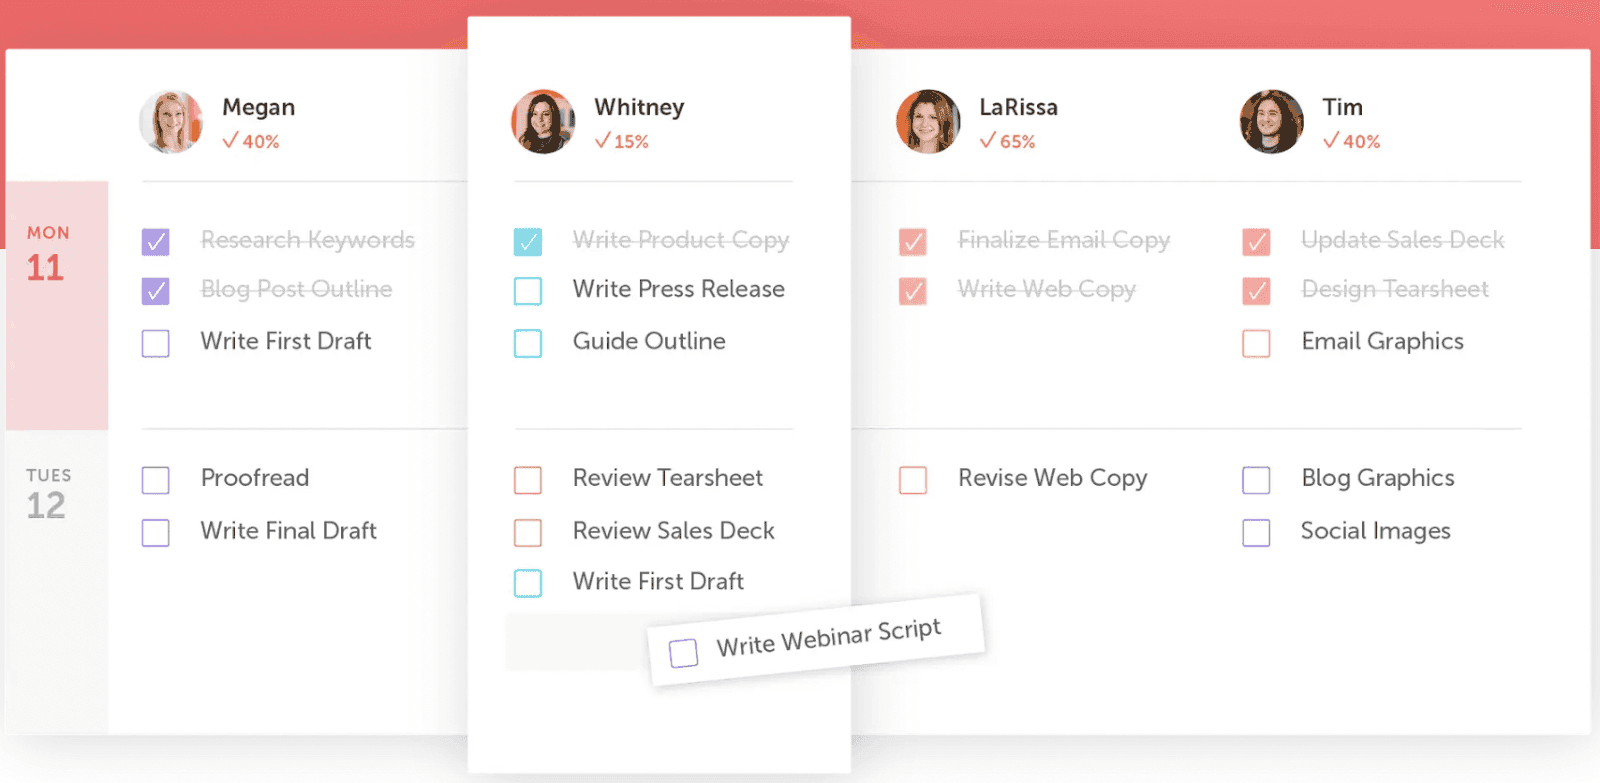 CoSchedule Marketing Suite is designed to keep marketers more organized